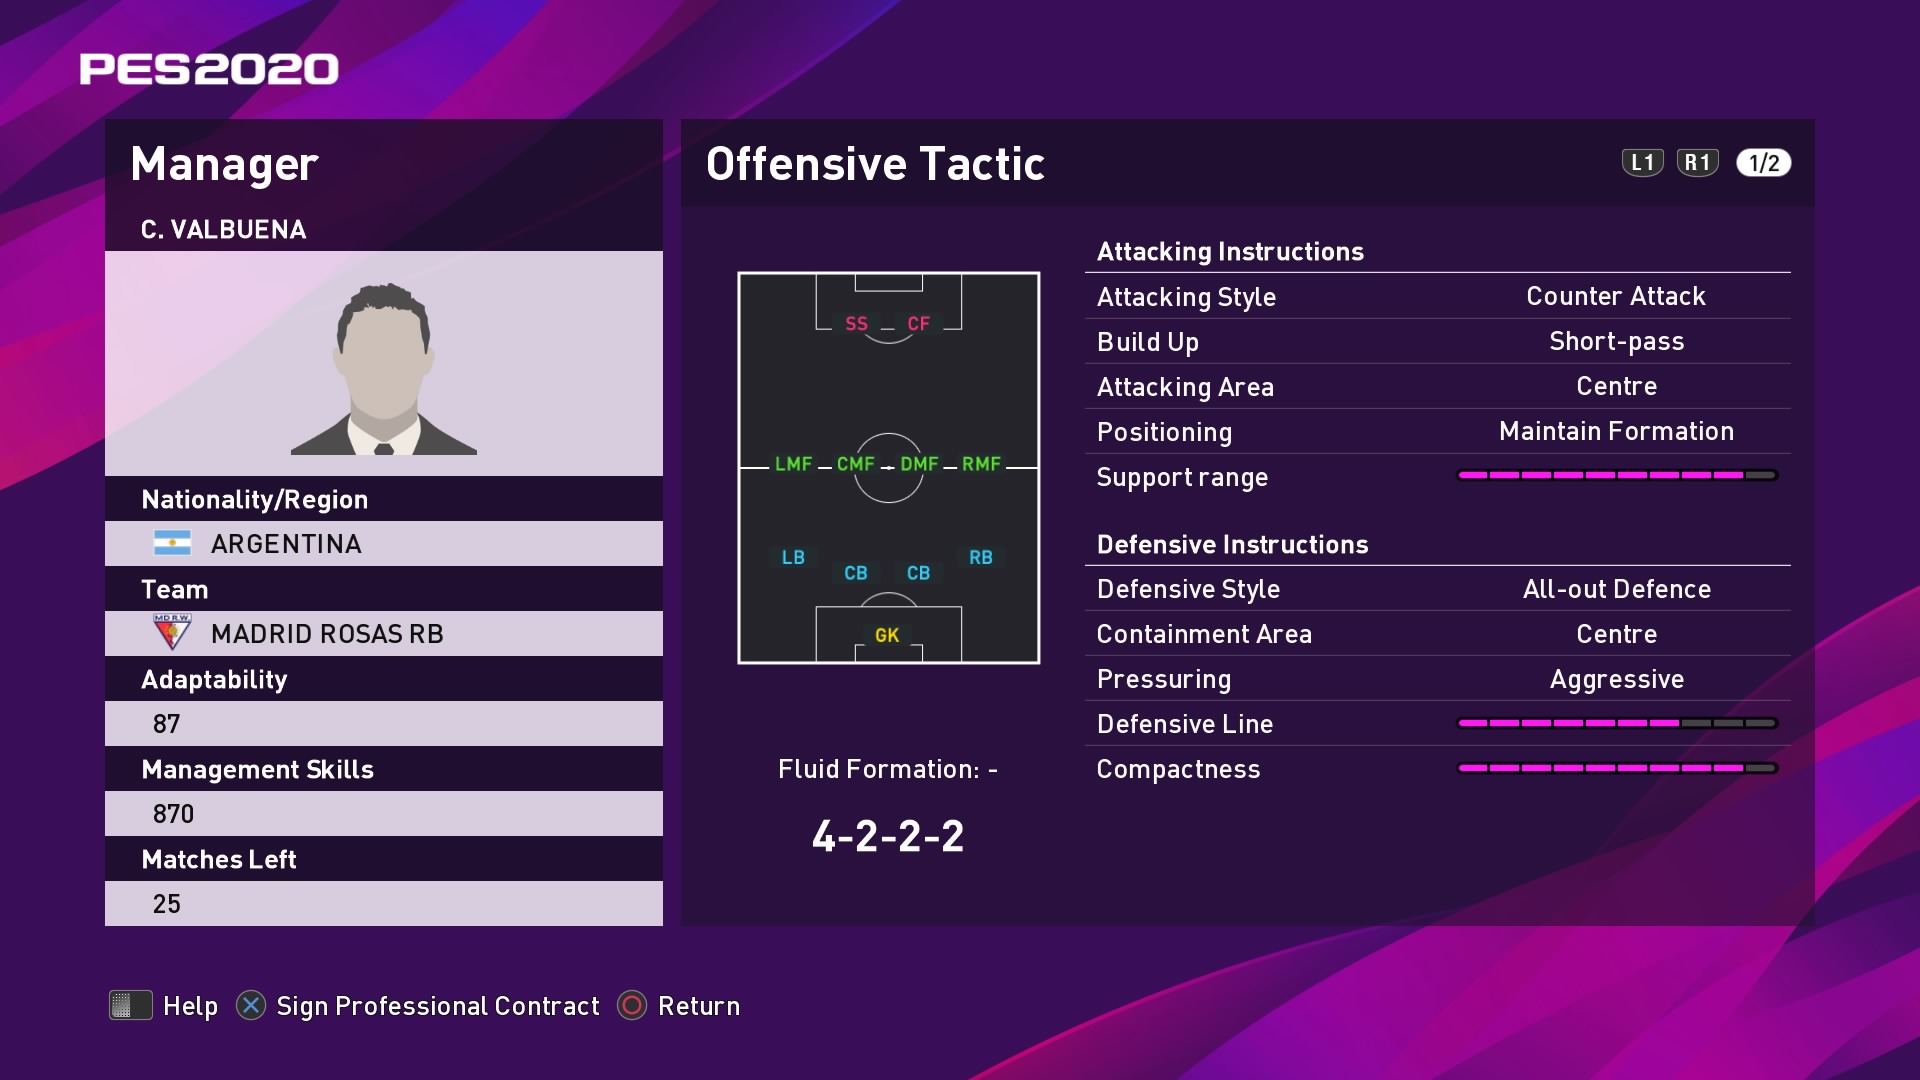 C. Valbuena (Diego Simeone) Offensive Tactic in PES 2020 myClub